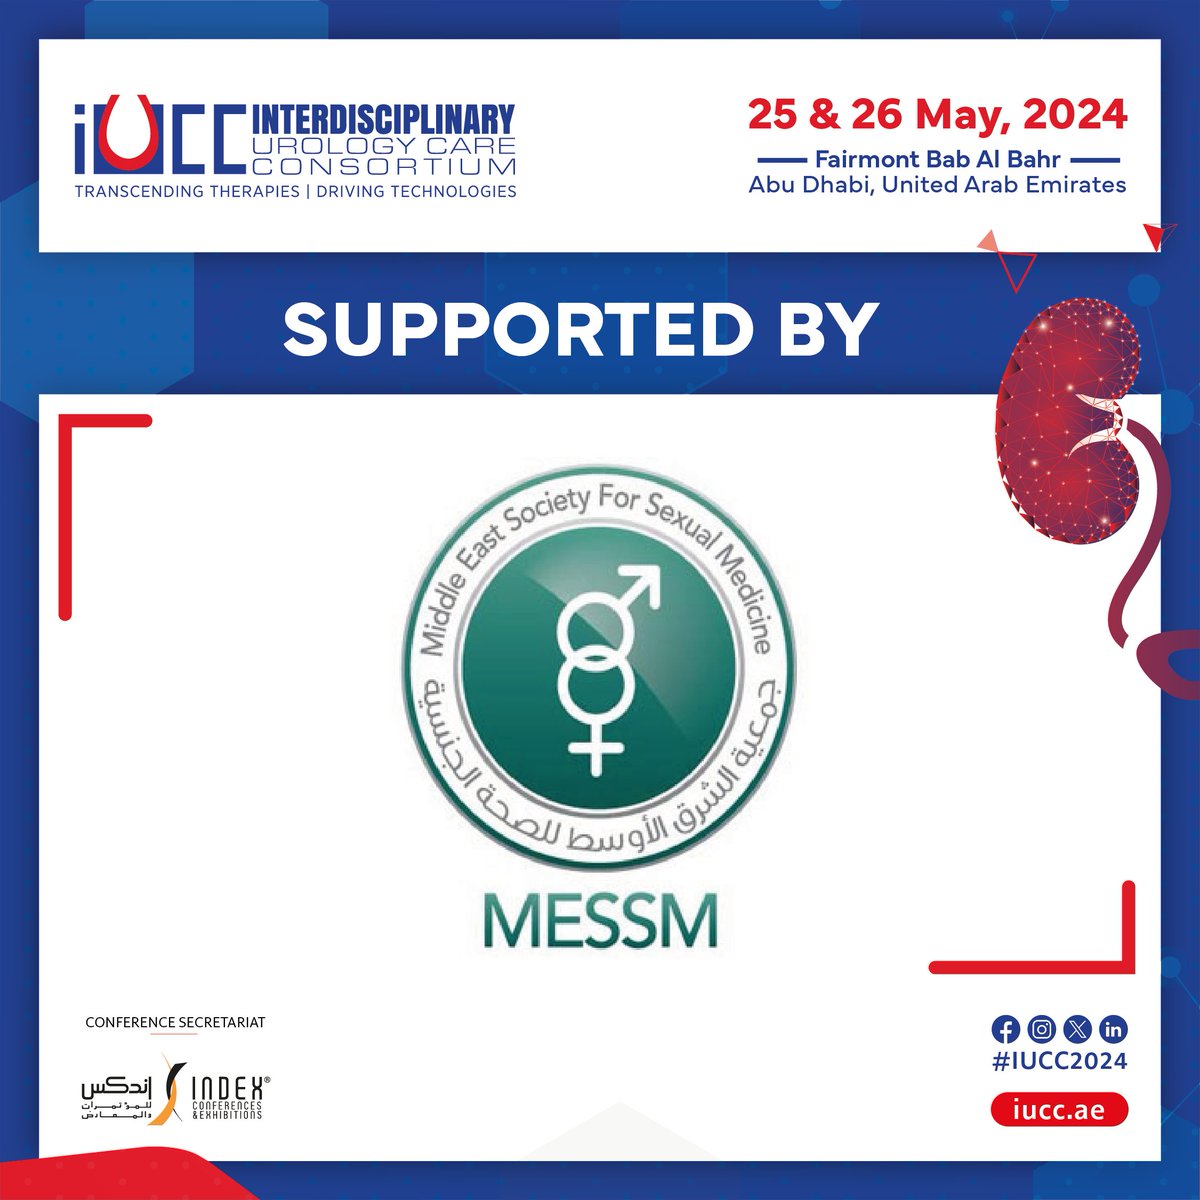 We are thrilled to announce that MESSM is supporting the IUCC at their upcoming congress! See you there! #MESSM #ISSM #SexualMedicine #SexualHealth #InnovativeUrology #HealthcareCollaboration #IUCC2024 #MedicalAdvancements #UrologyCare #HealthcareConference